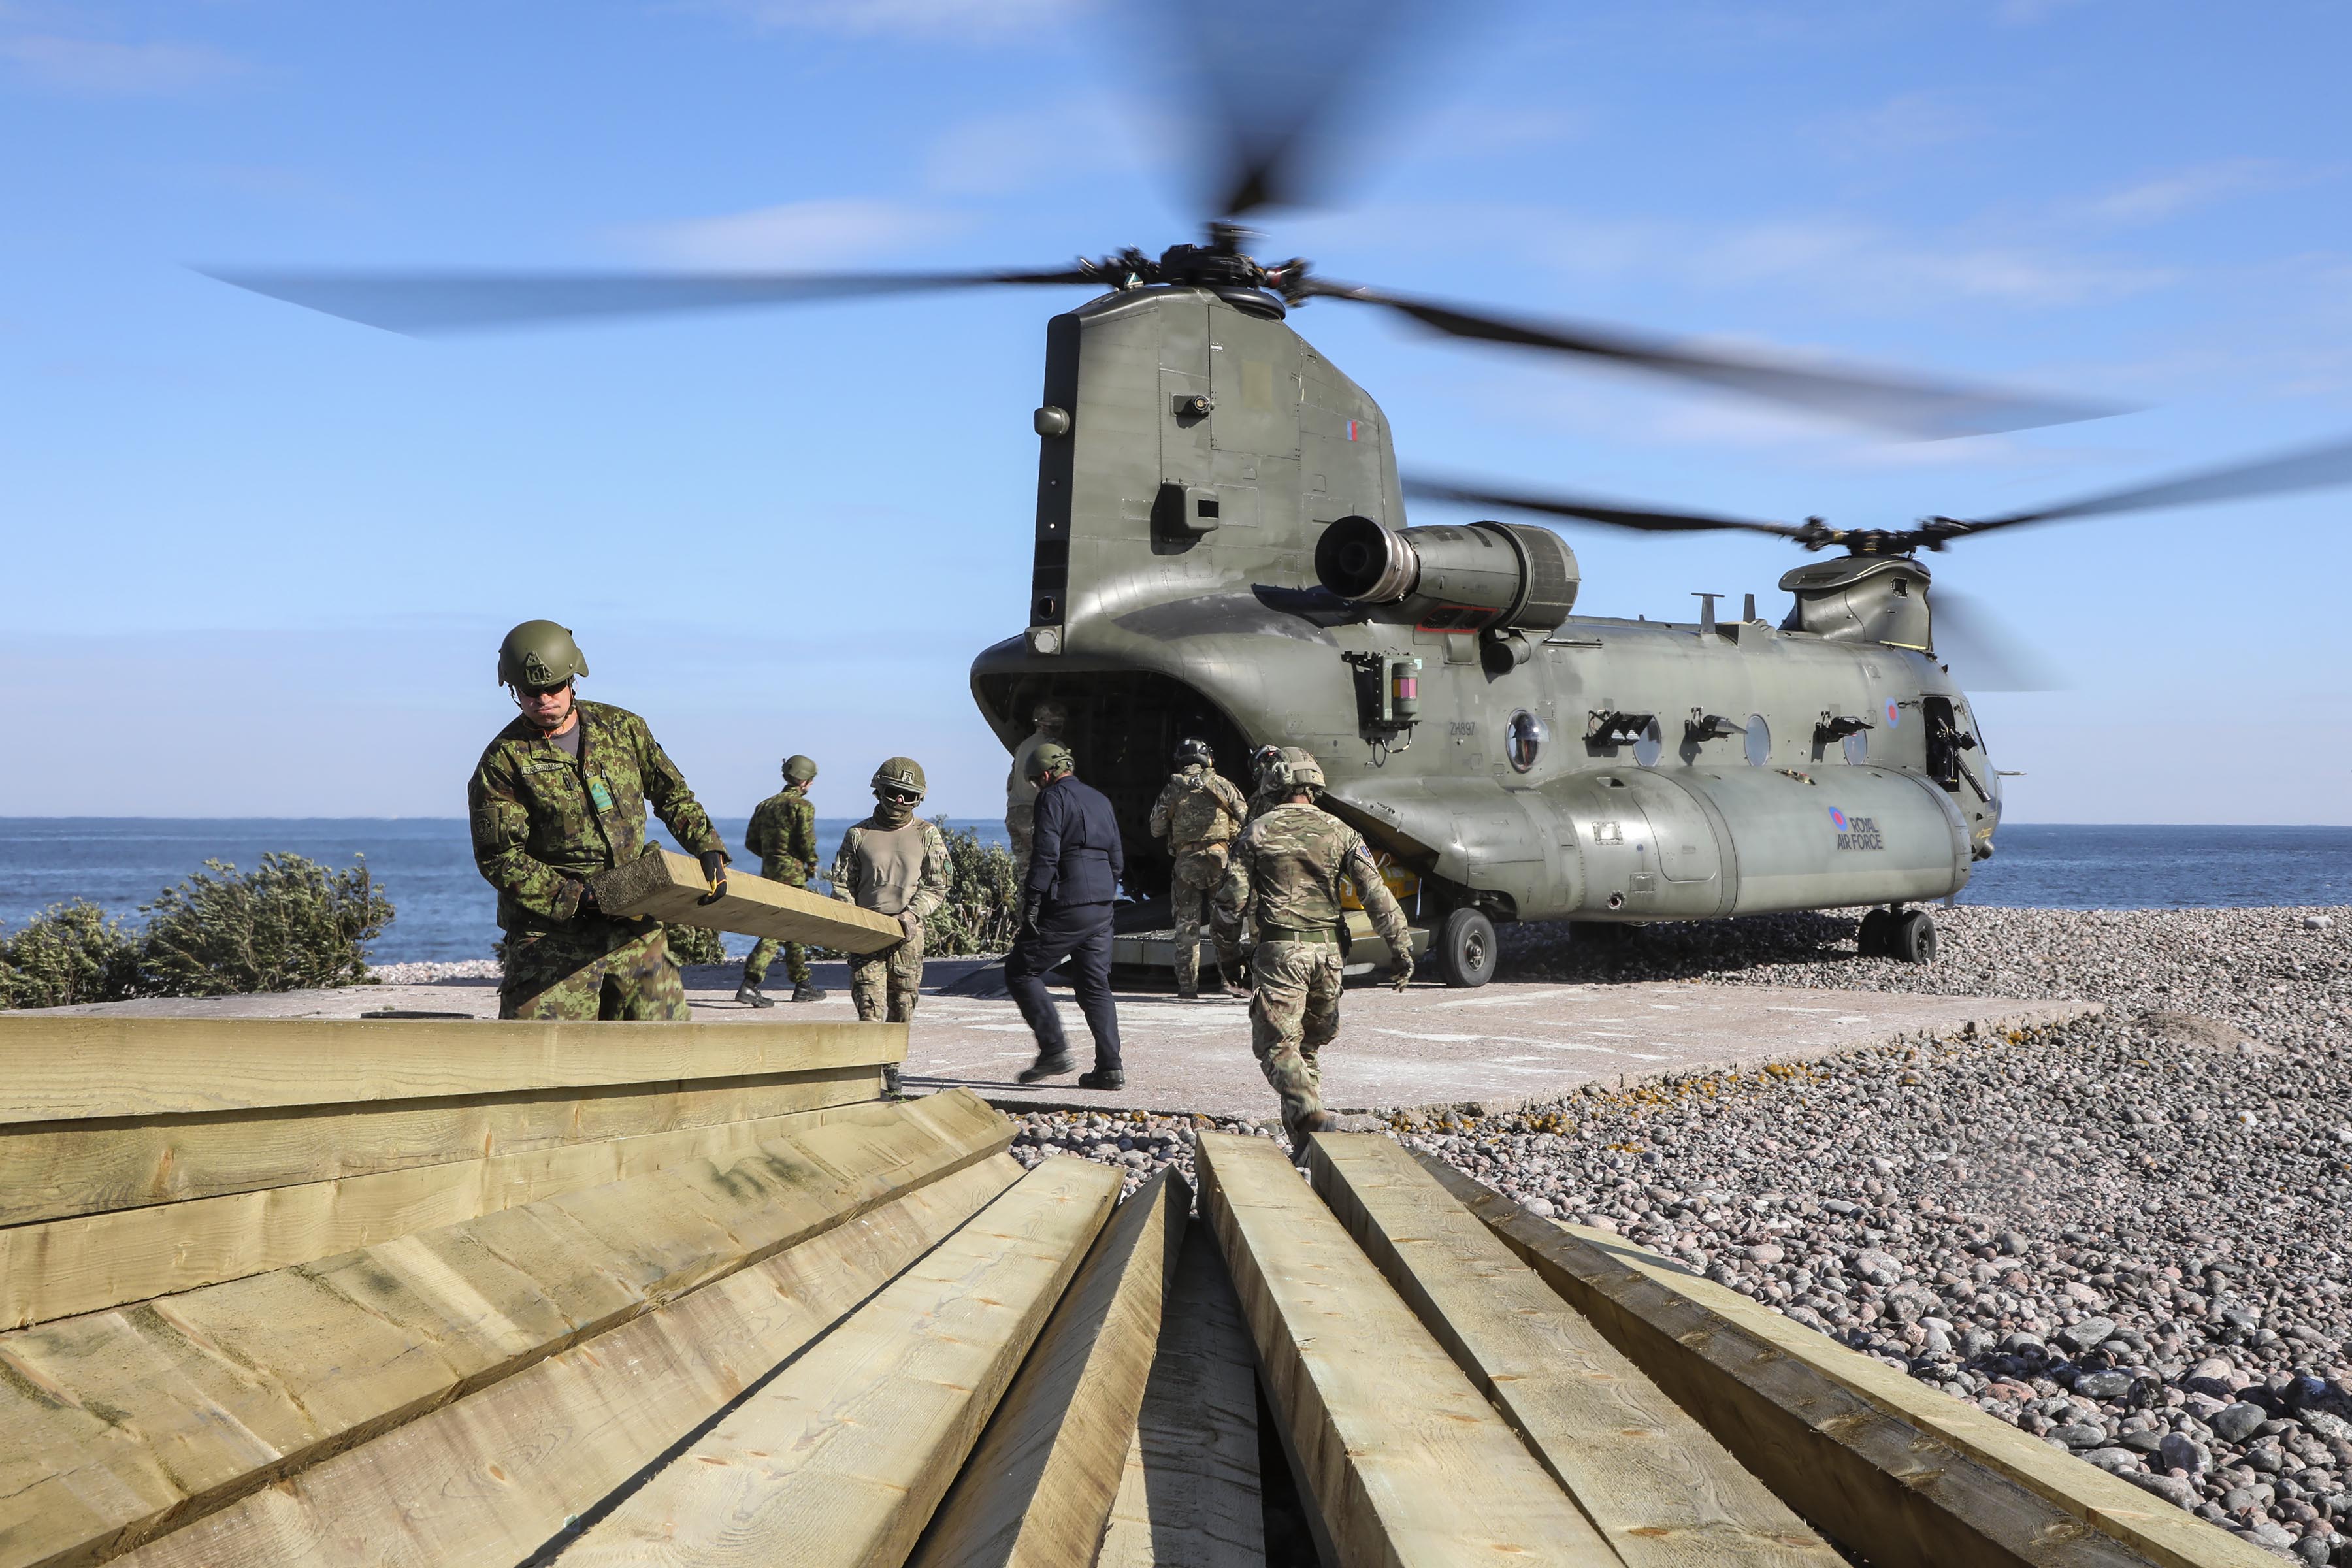 Image shows RAF Regiment carrying planks of wood on the beach, with Chinook in the background.